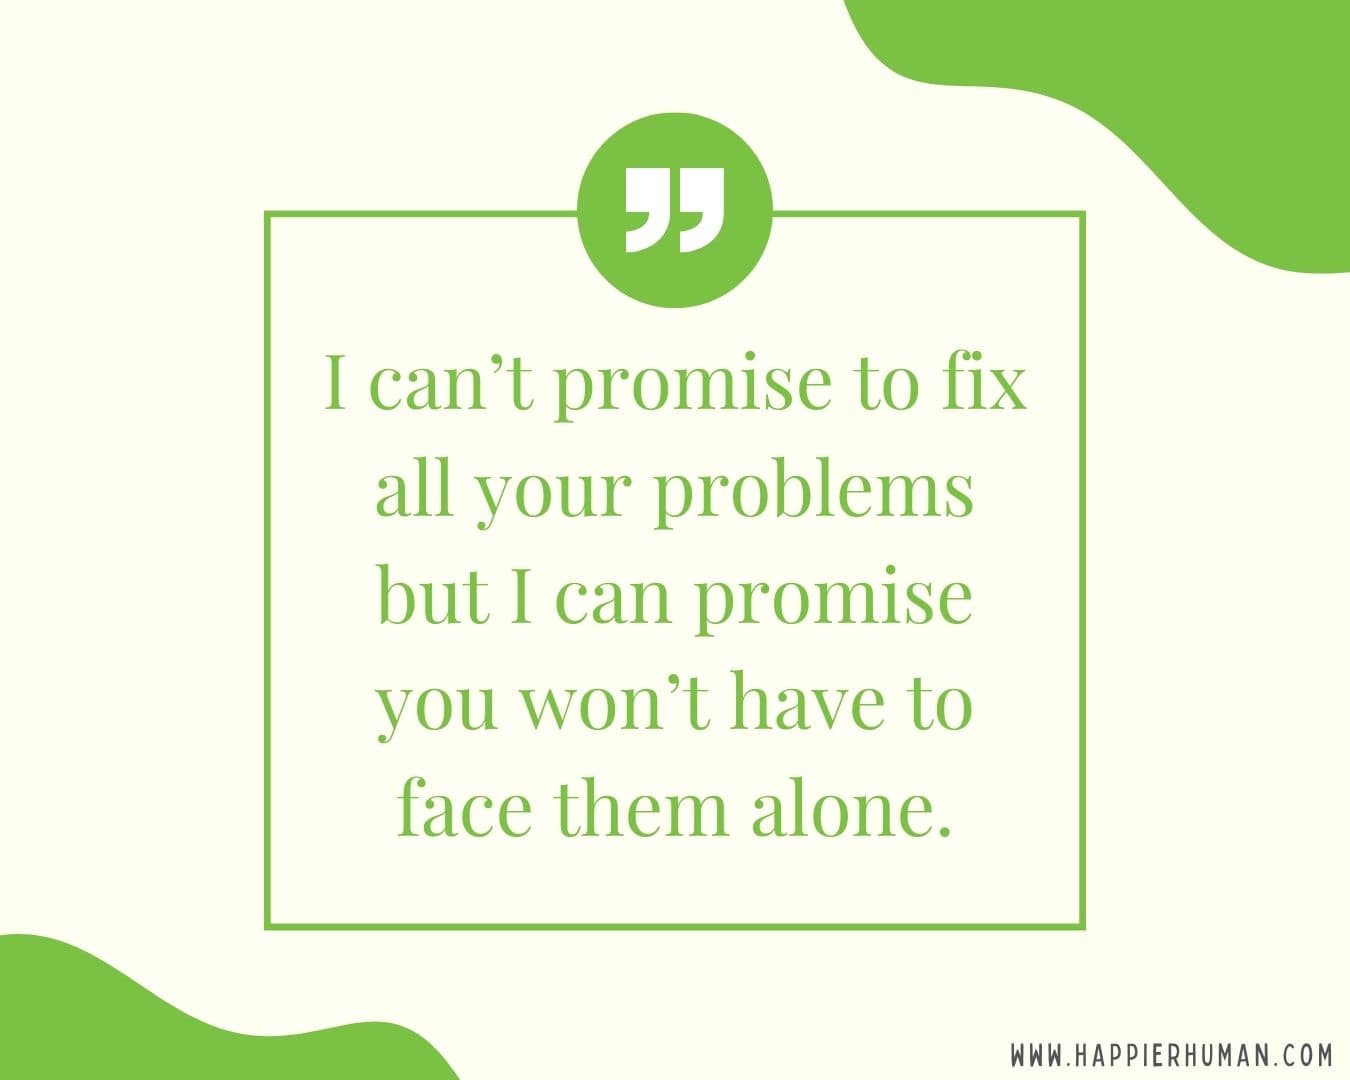 I’m Here for You Quotes - “I can’t promise to fix all your problems but I can promise you won’t have to face them alone.”